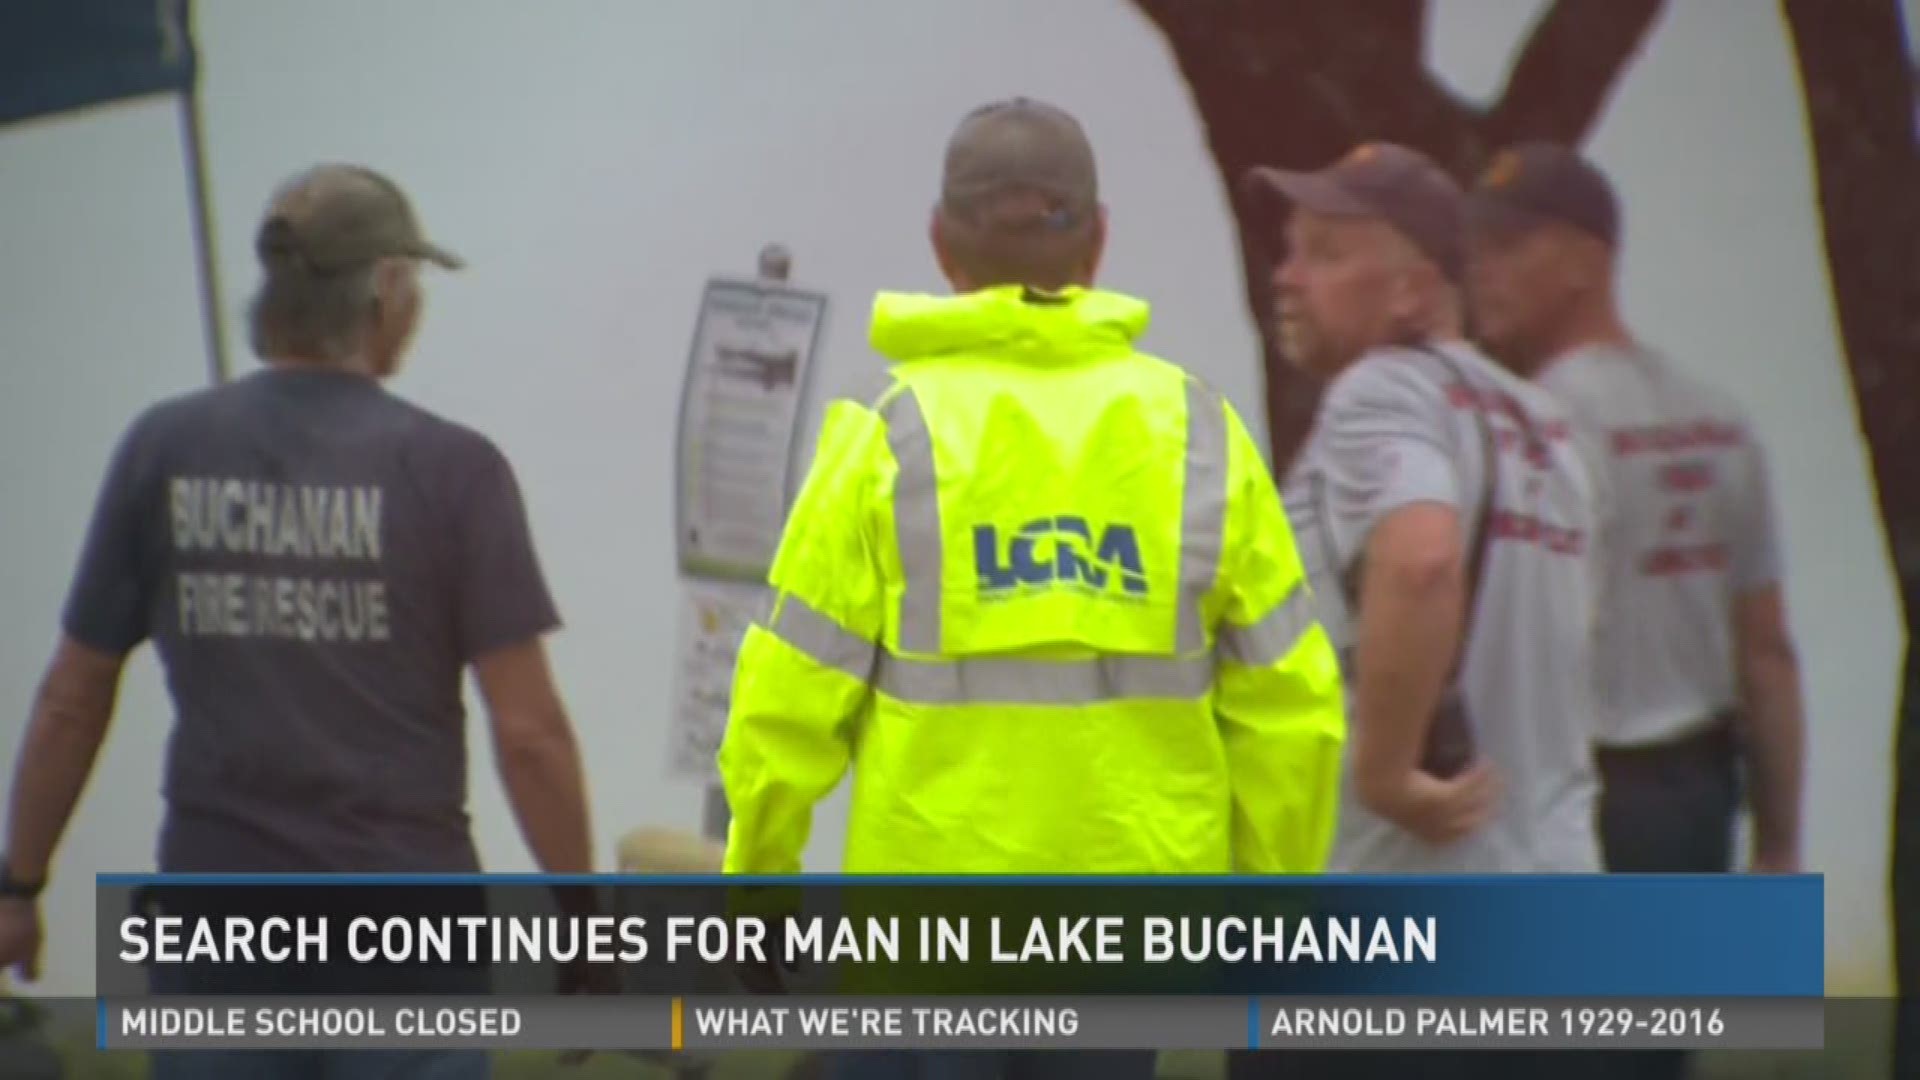 Search continues for man in Lake Buchanan